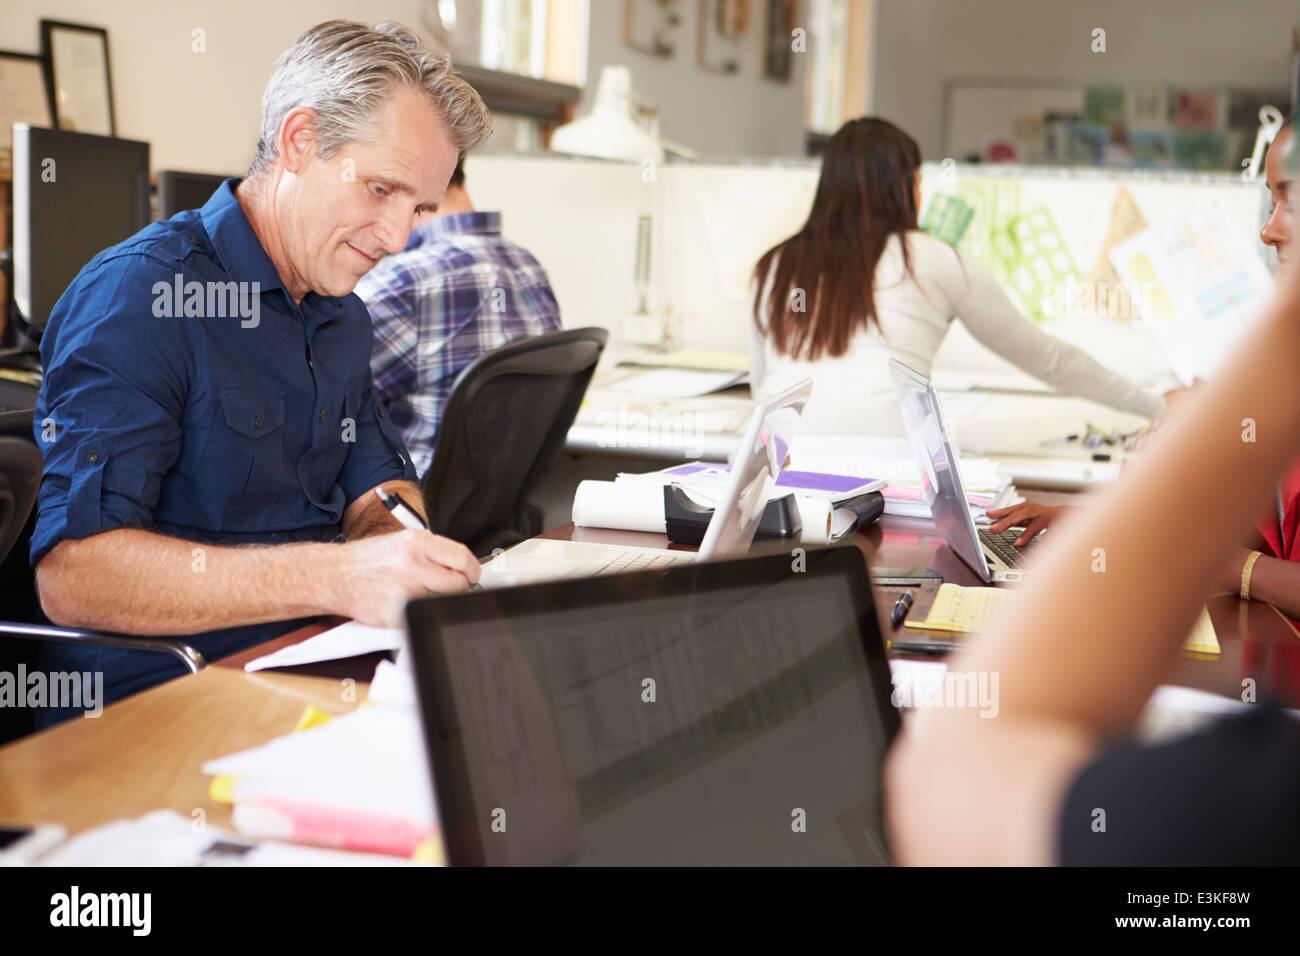 Team Of Architects Working At Desks In Office Stock Photo